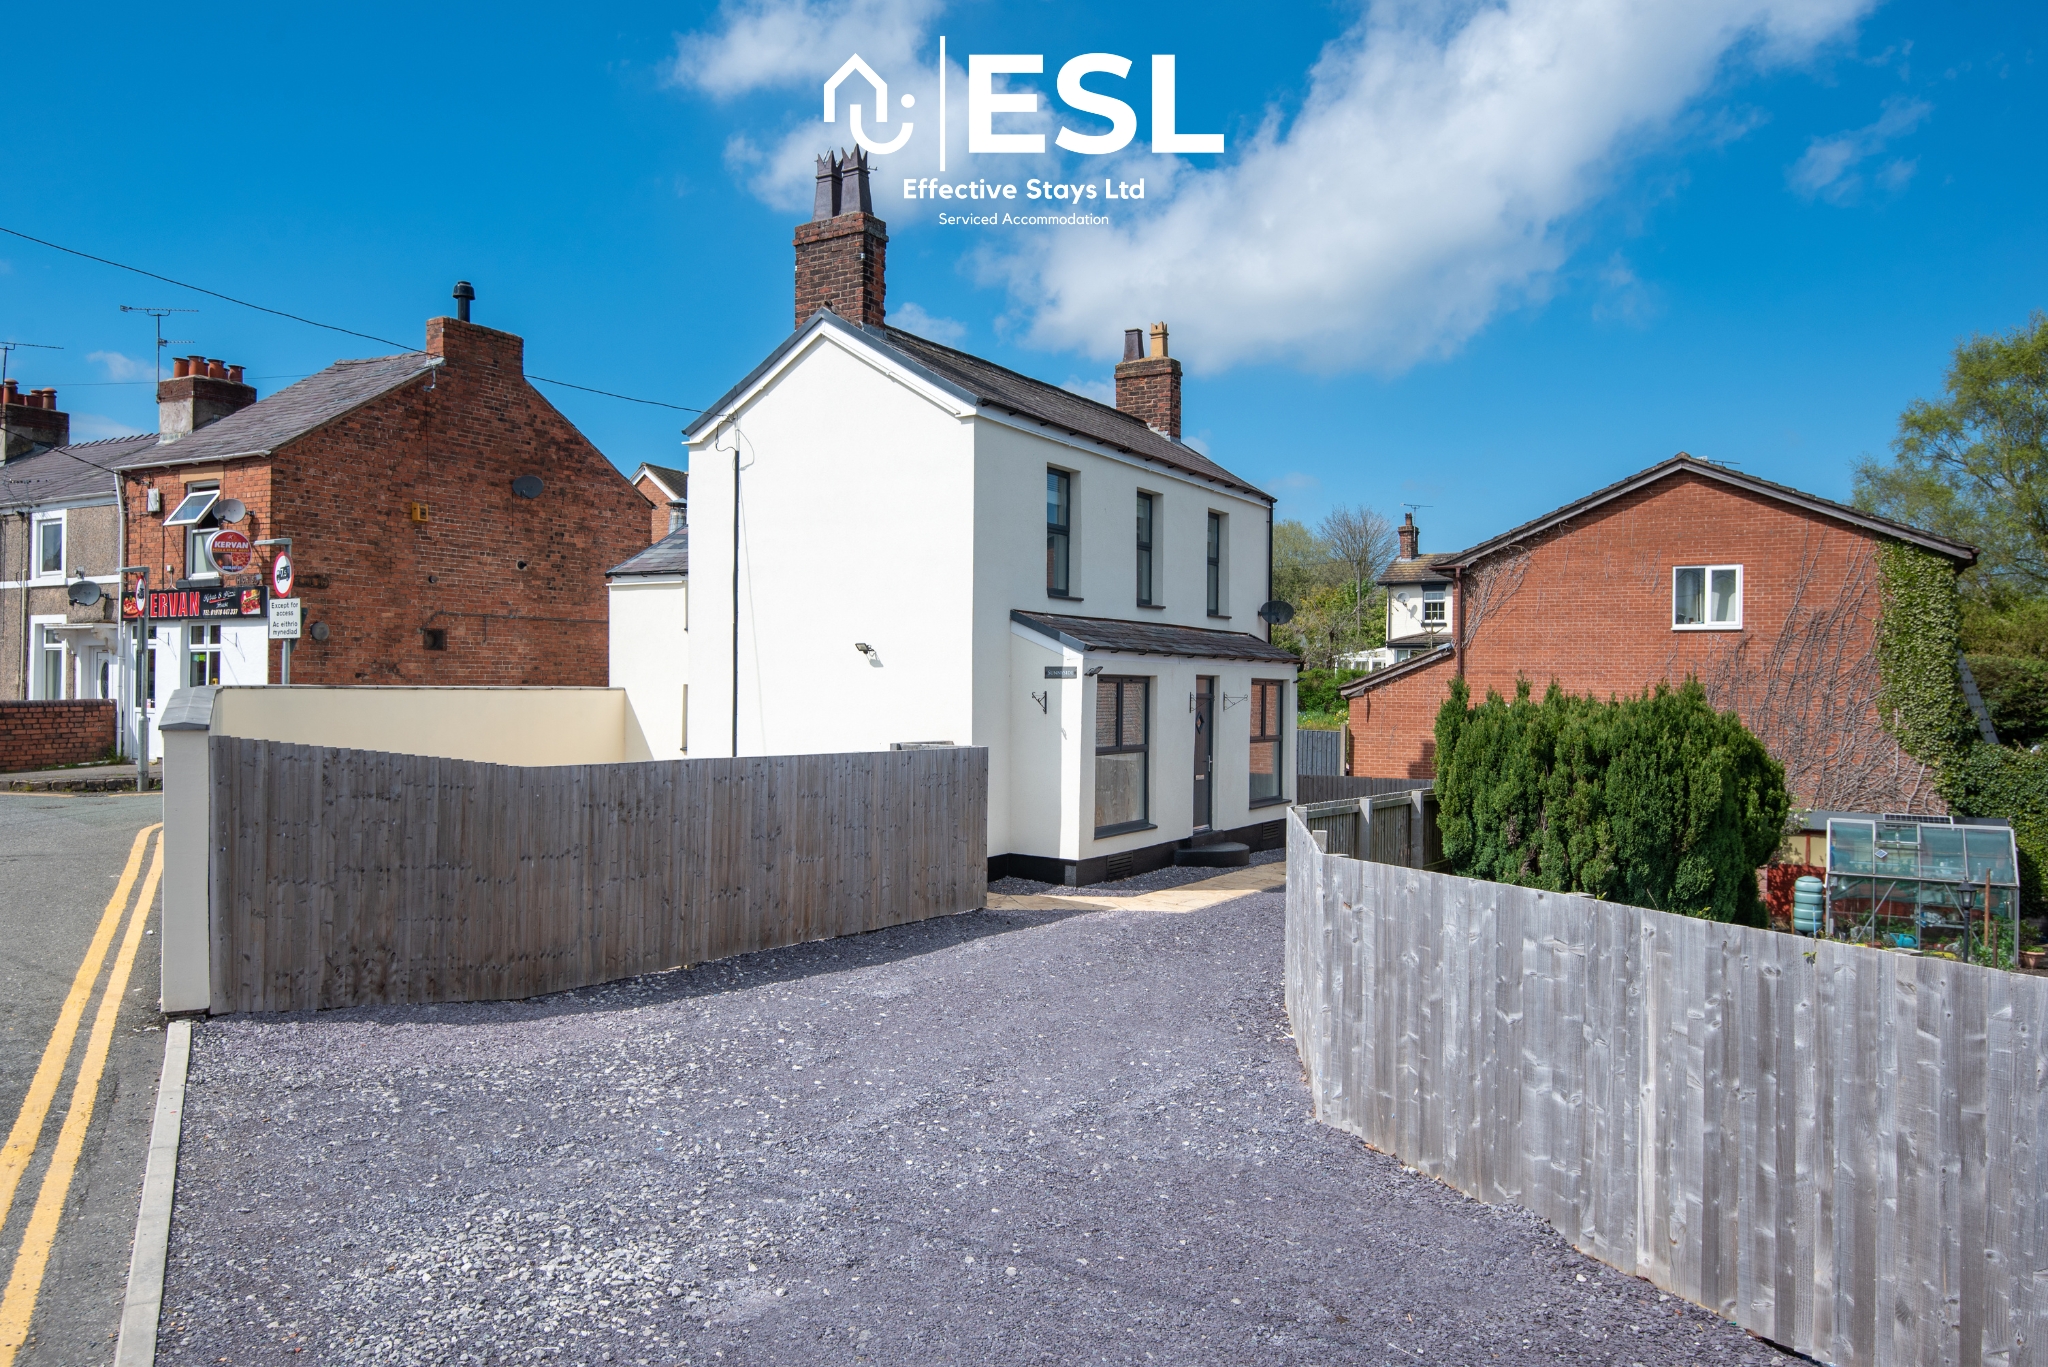 SSWX - 5 Bedroom House with parking in Wrexham